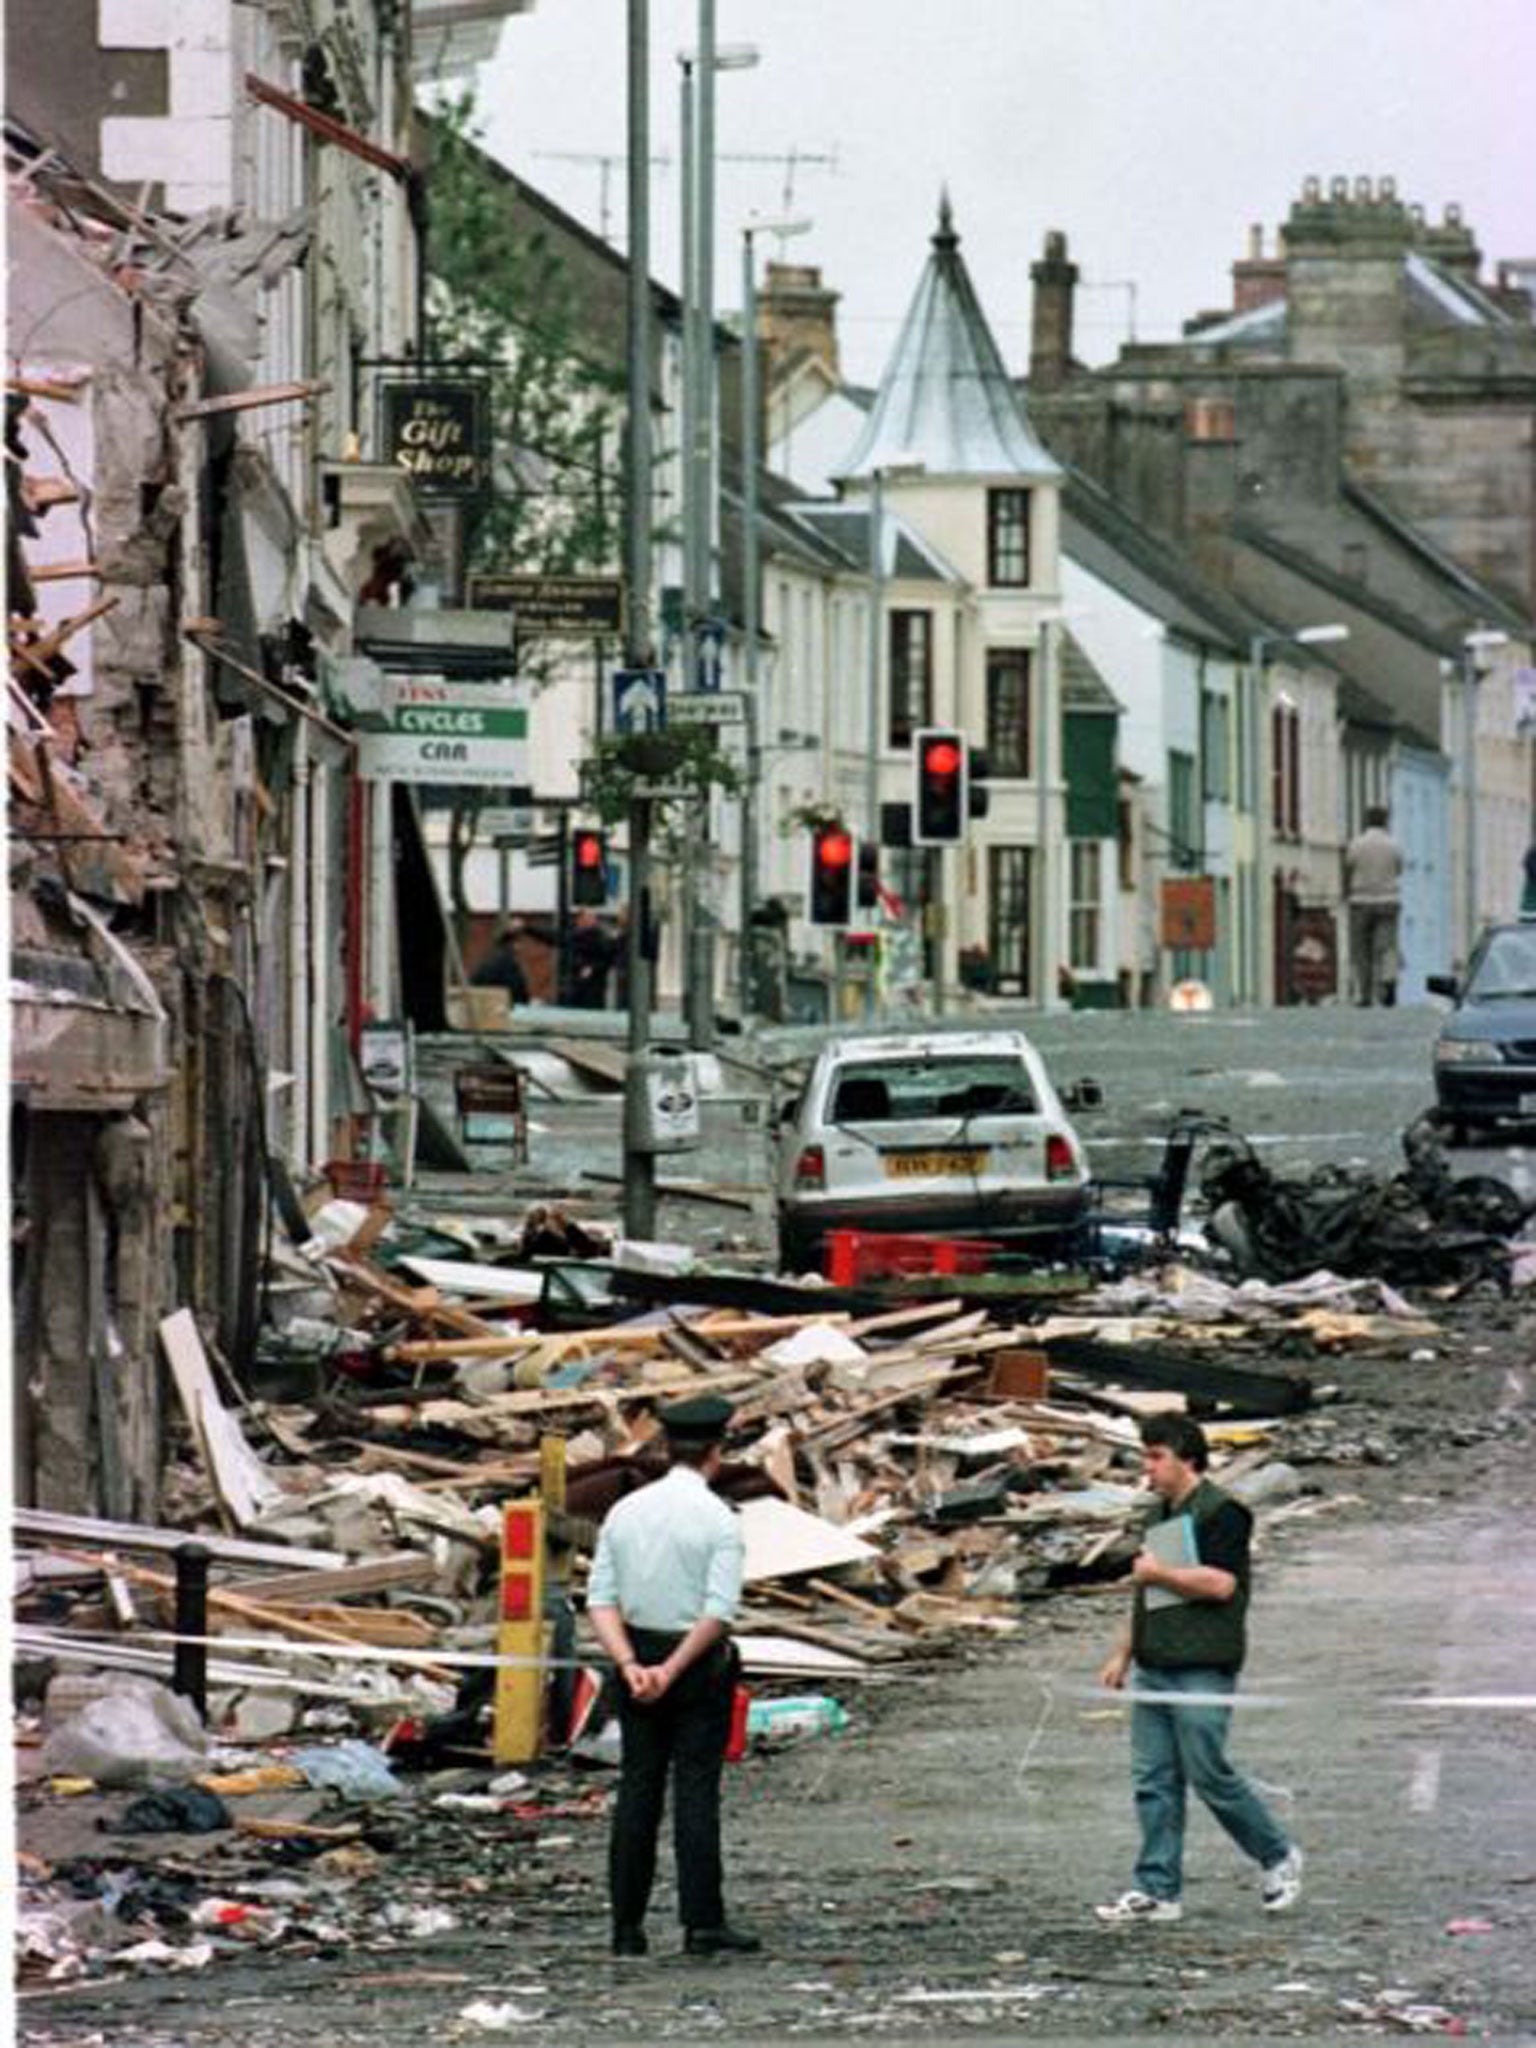 Carnage after the Real IRA bomb explosion in Omagh in 1998